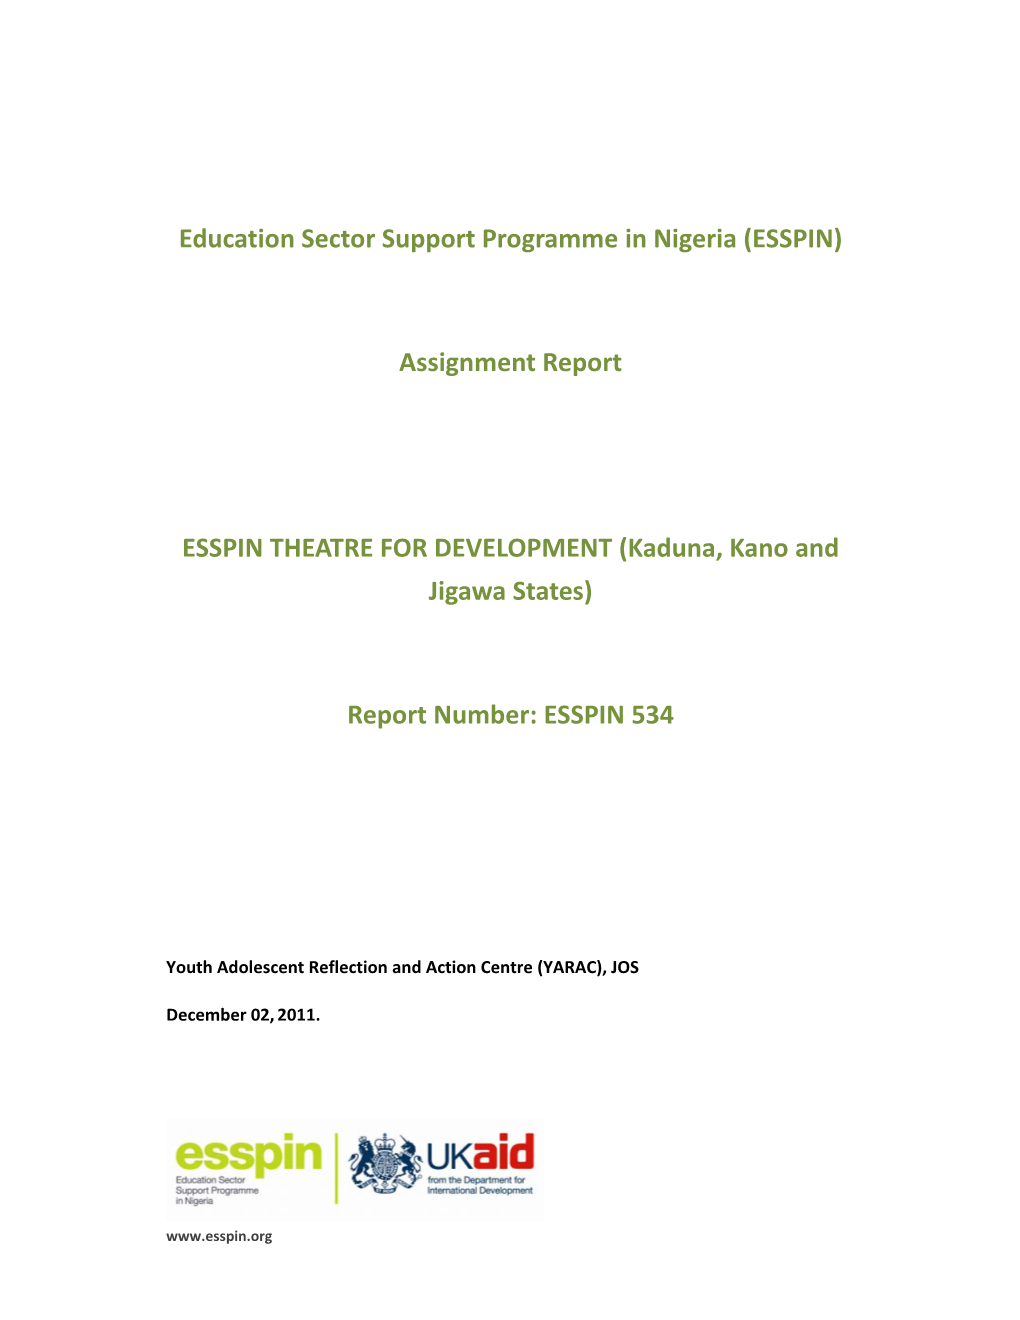 Education Sector Support Programme in Nigeria (ESSPIN) Assignment Report ESSPIN THEATRE for DEVELOPMENT (Kaduna, Kano and Jigawa